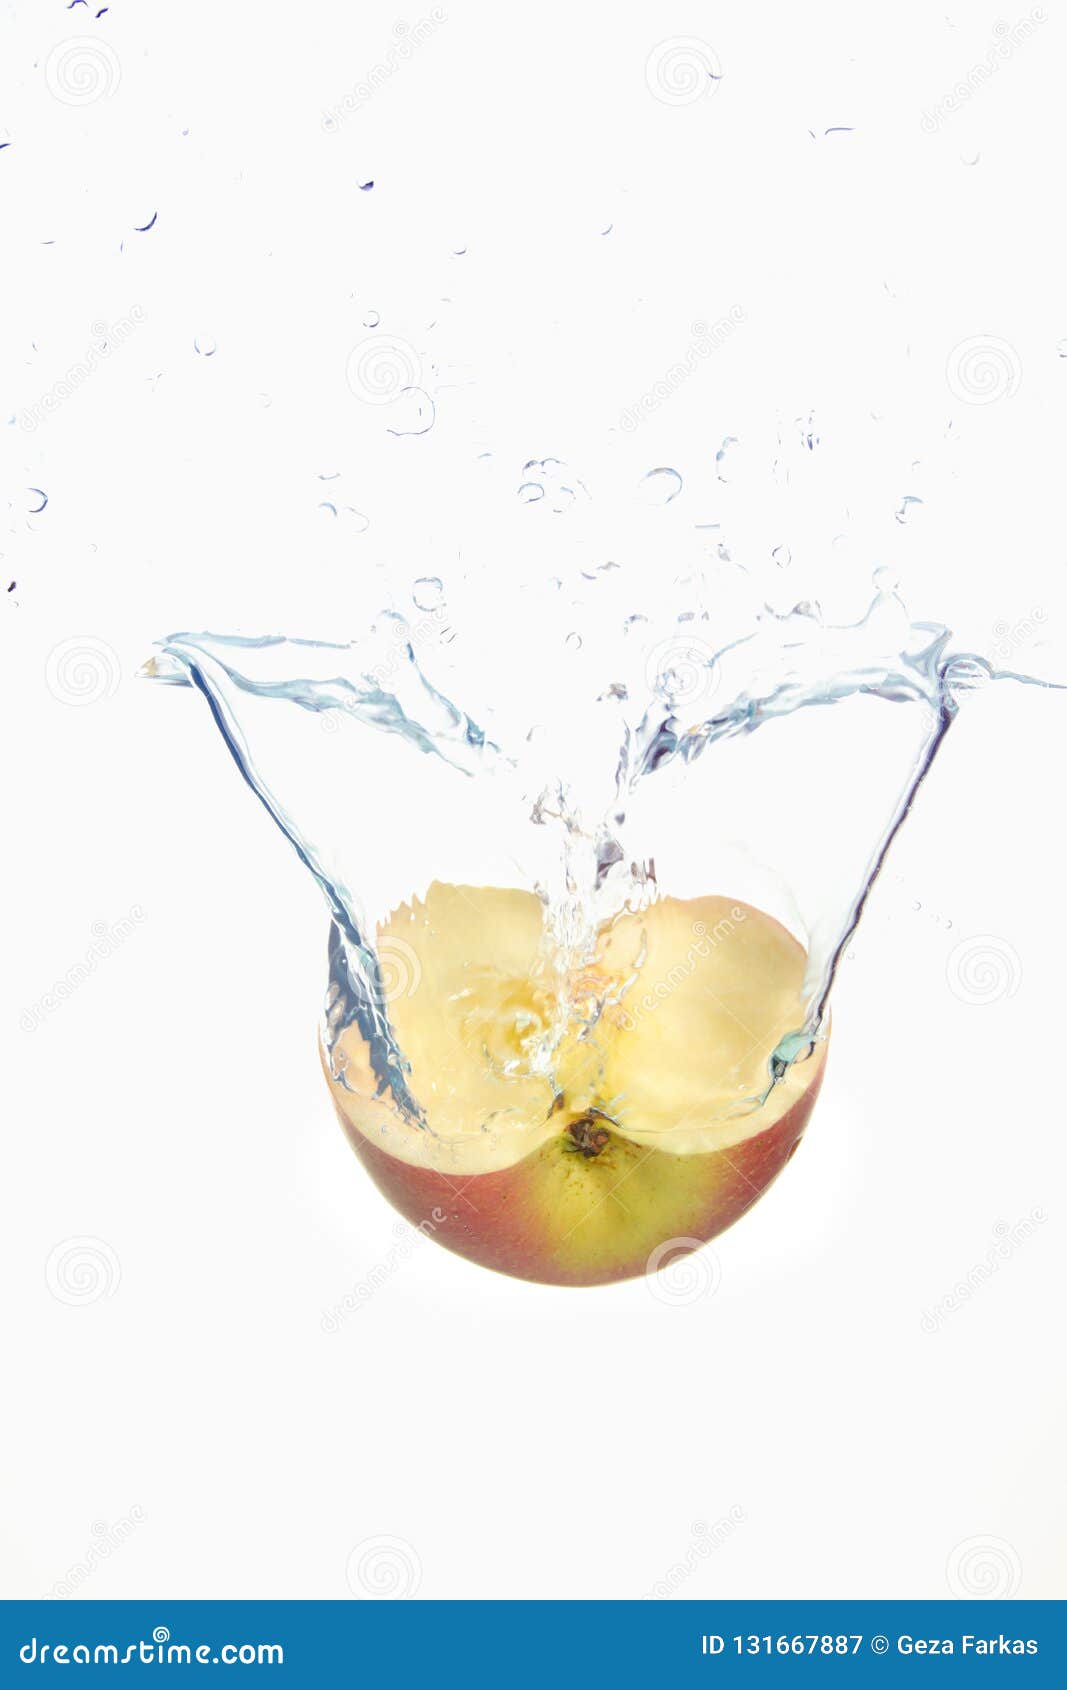 apple slice spash in water on white background